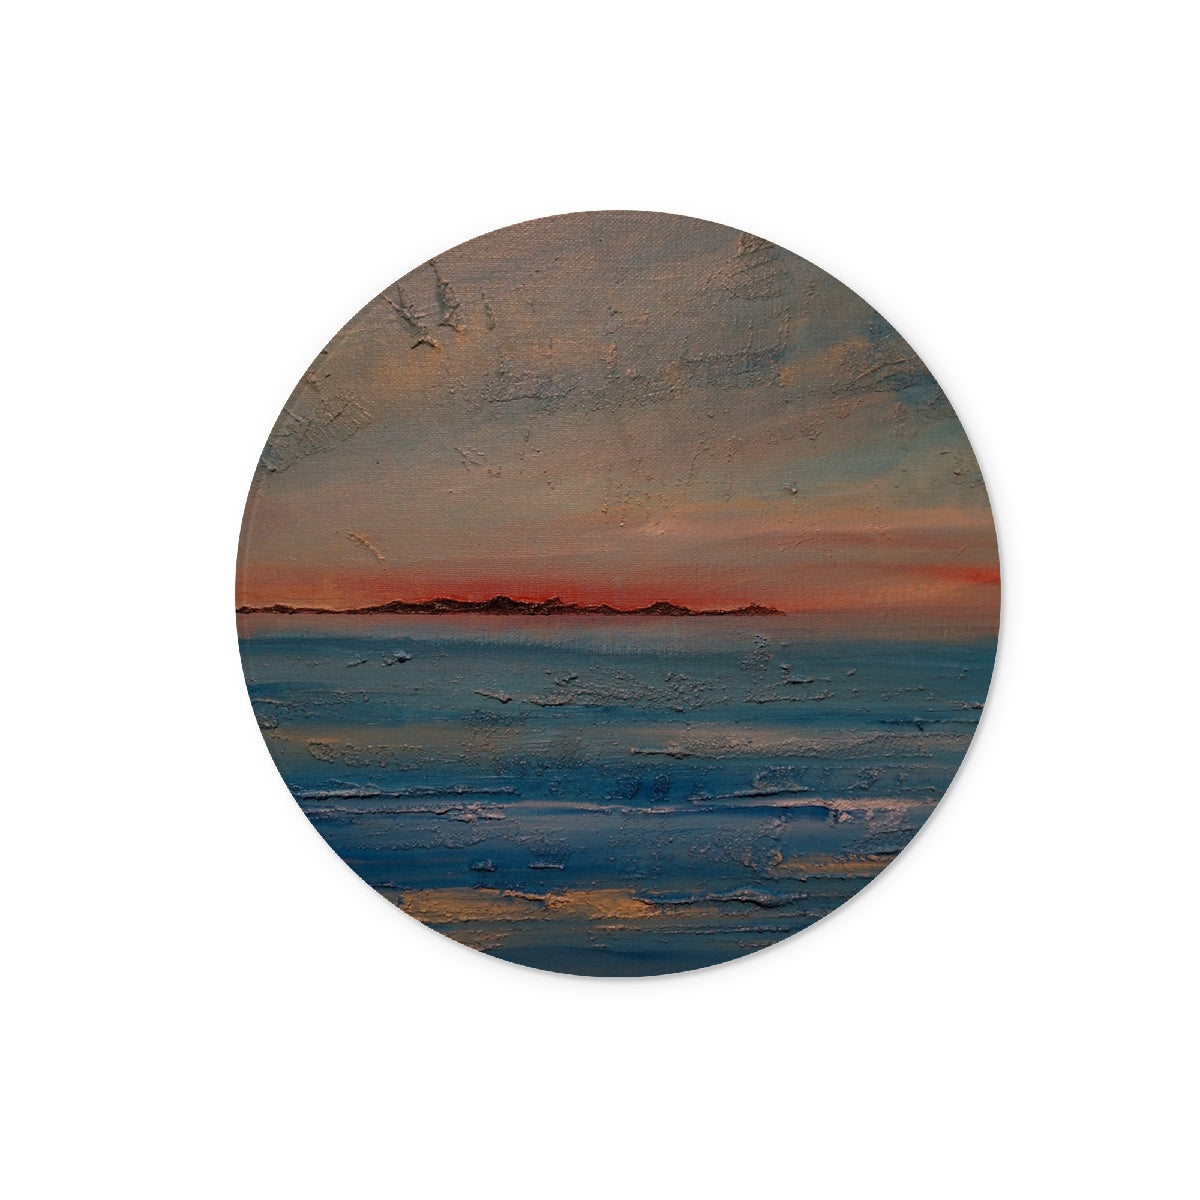 Gigha Sunset Art Gifts Glass Chopping Board-Glass Chopping Boards-Hebridean Islands Art Gallery-12" Round-Paintings, Prints, Homeware, Art Gifts From Scotland By Scottish Artist Kevin Hunter